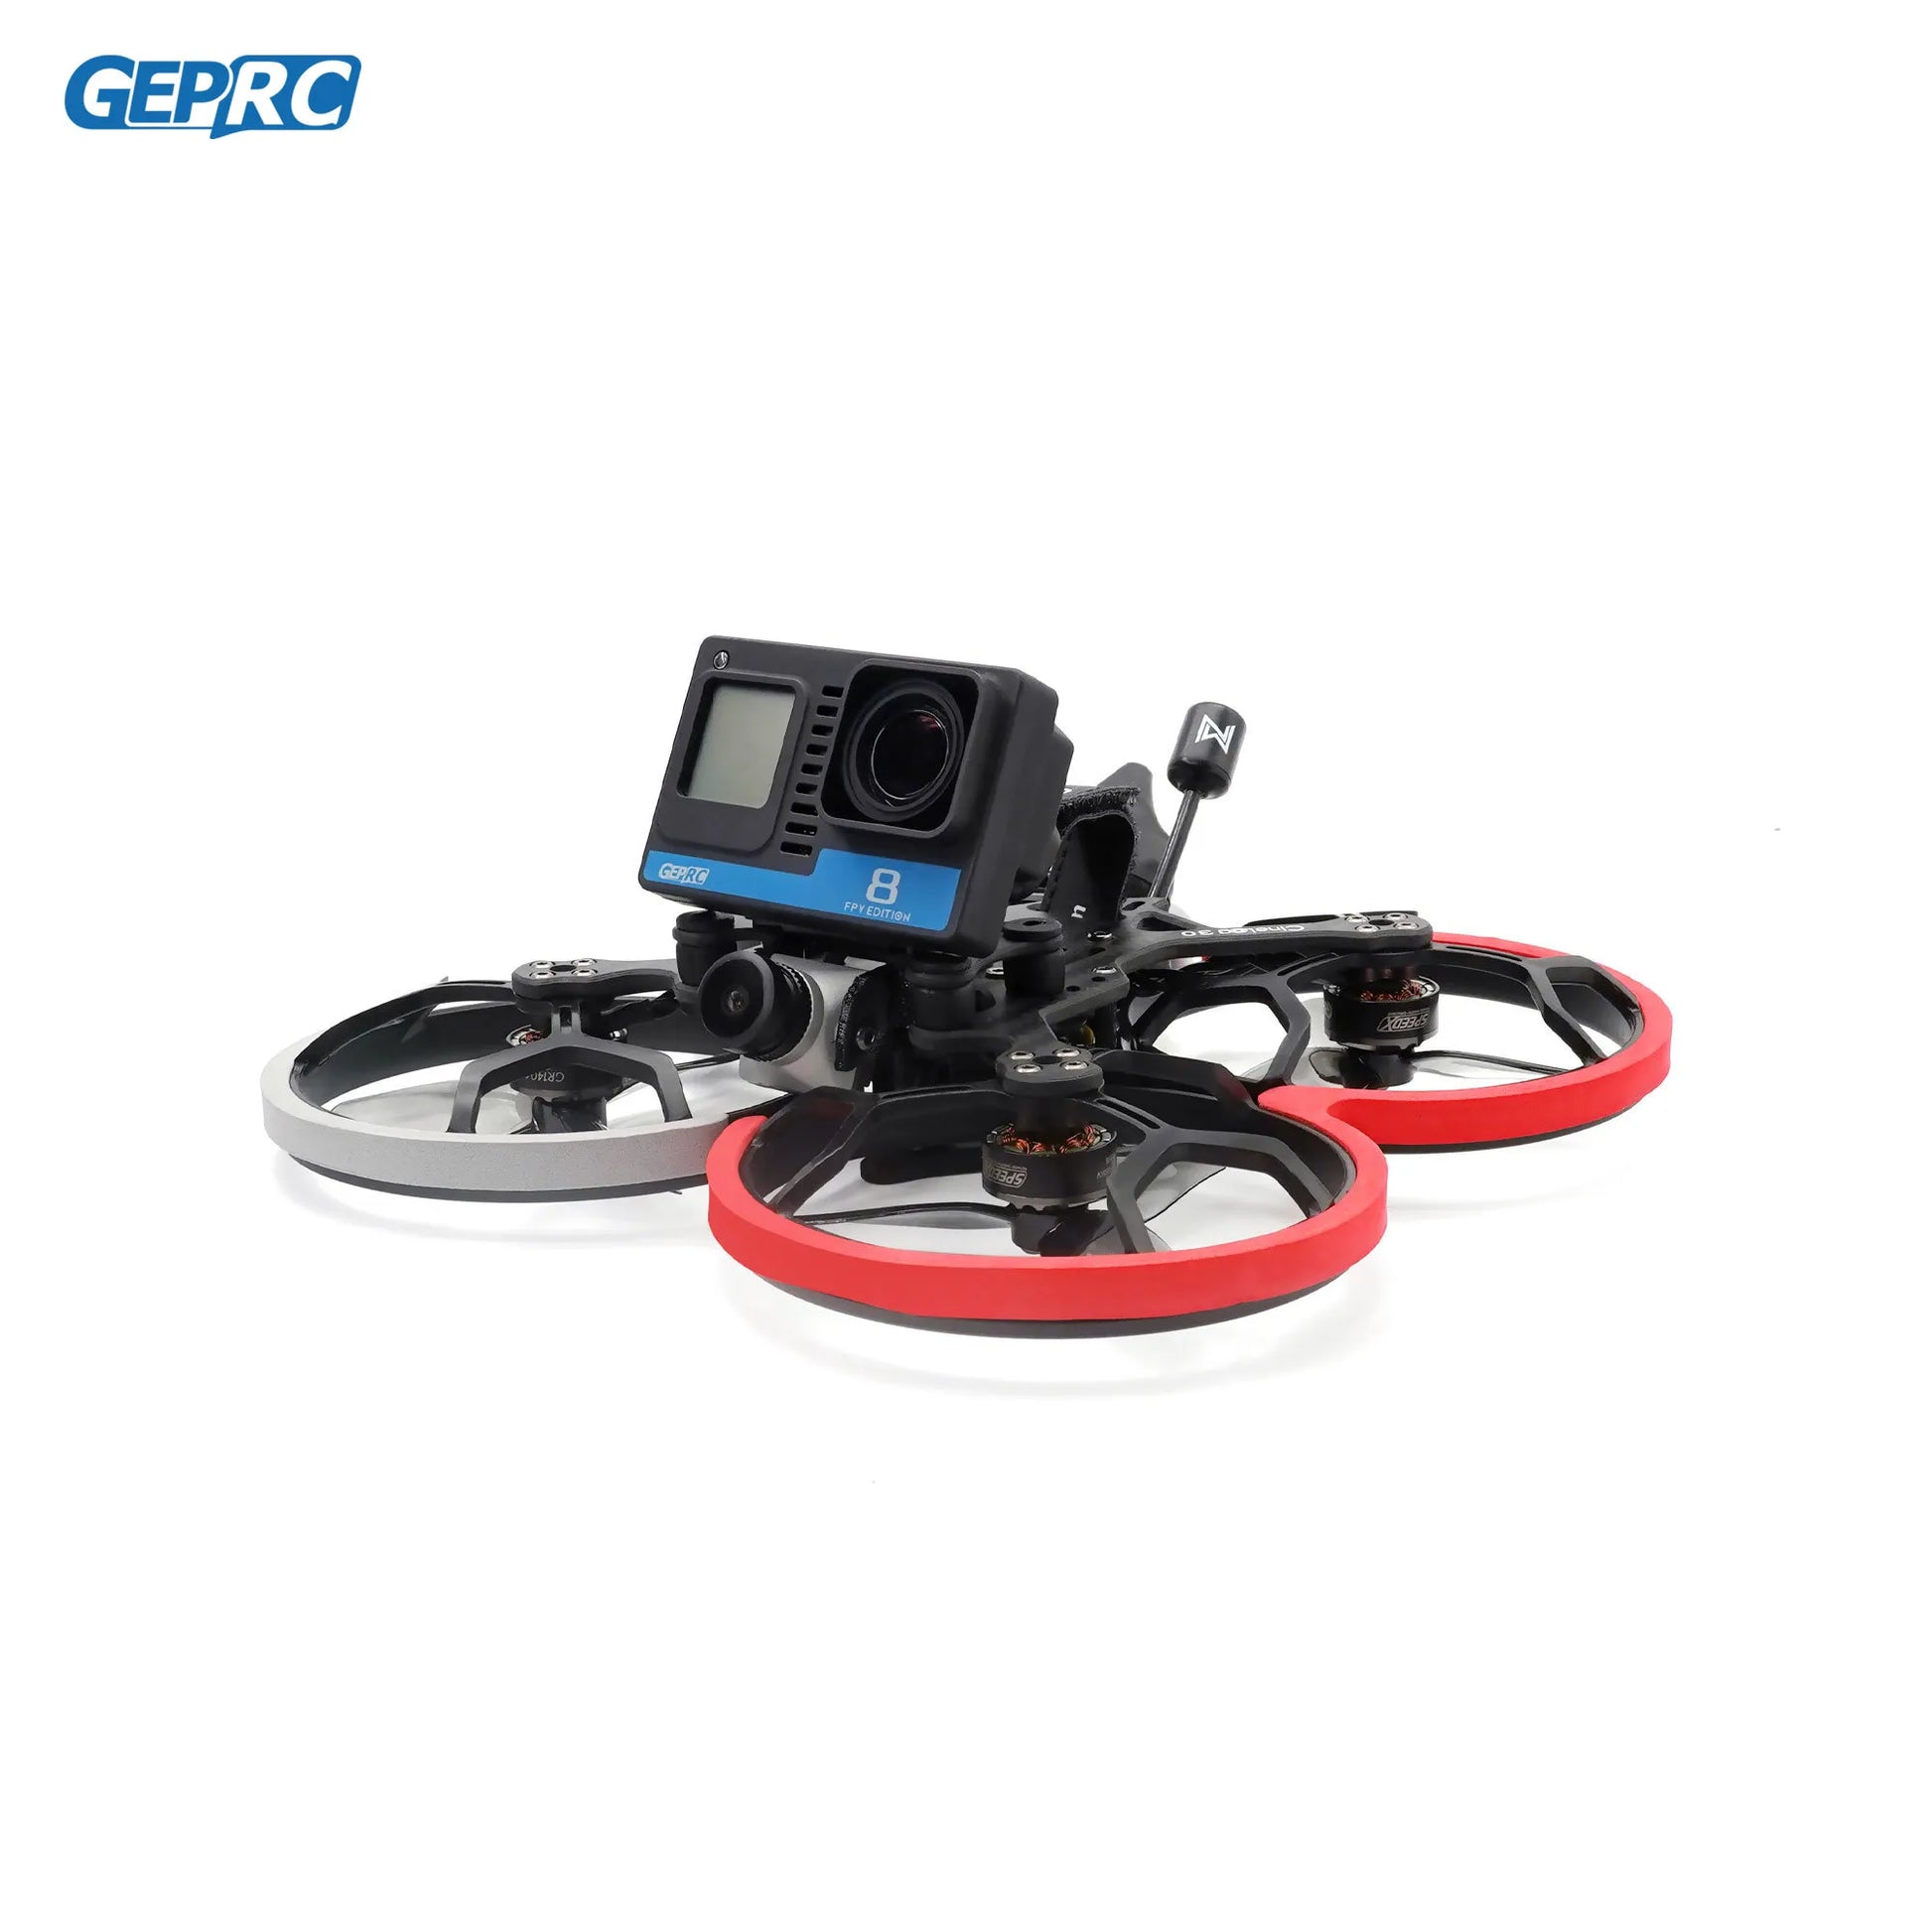 GEPRC Cinebot30 HD O3 FPV Drone System 6S 2450KV VTX O3 Air Unit 4K 60fps  Video 155 Wide-angle RC FPV Quadcopter Freestyle Drone